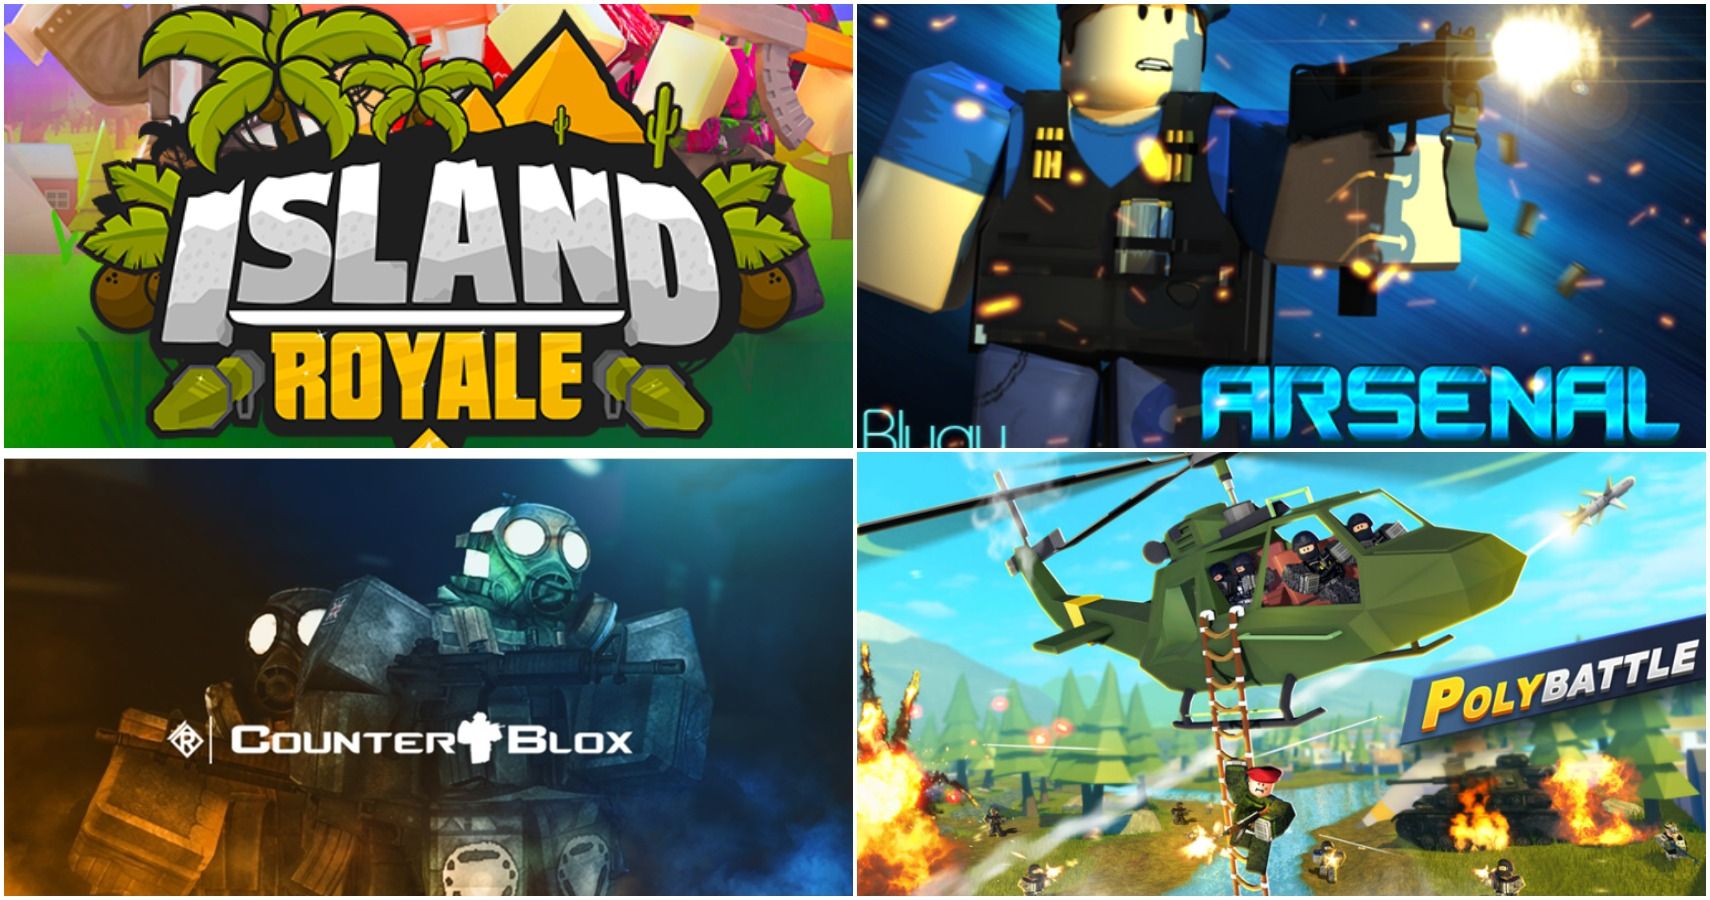 Roblox 10 Best Shooting Games - roblox island royale xbox